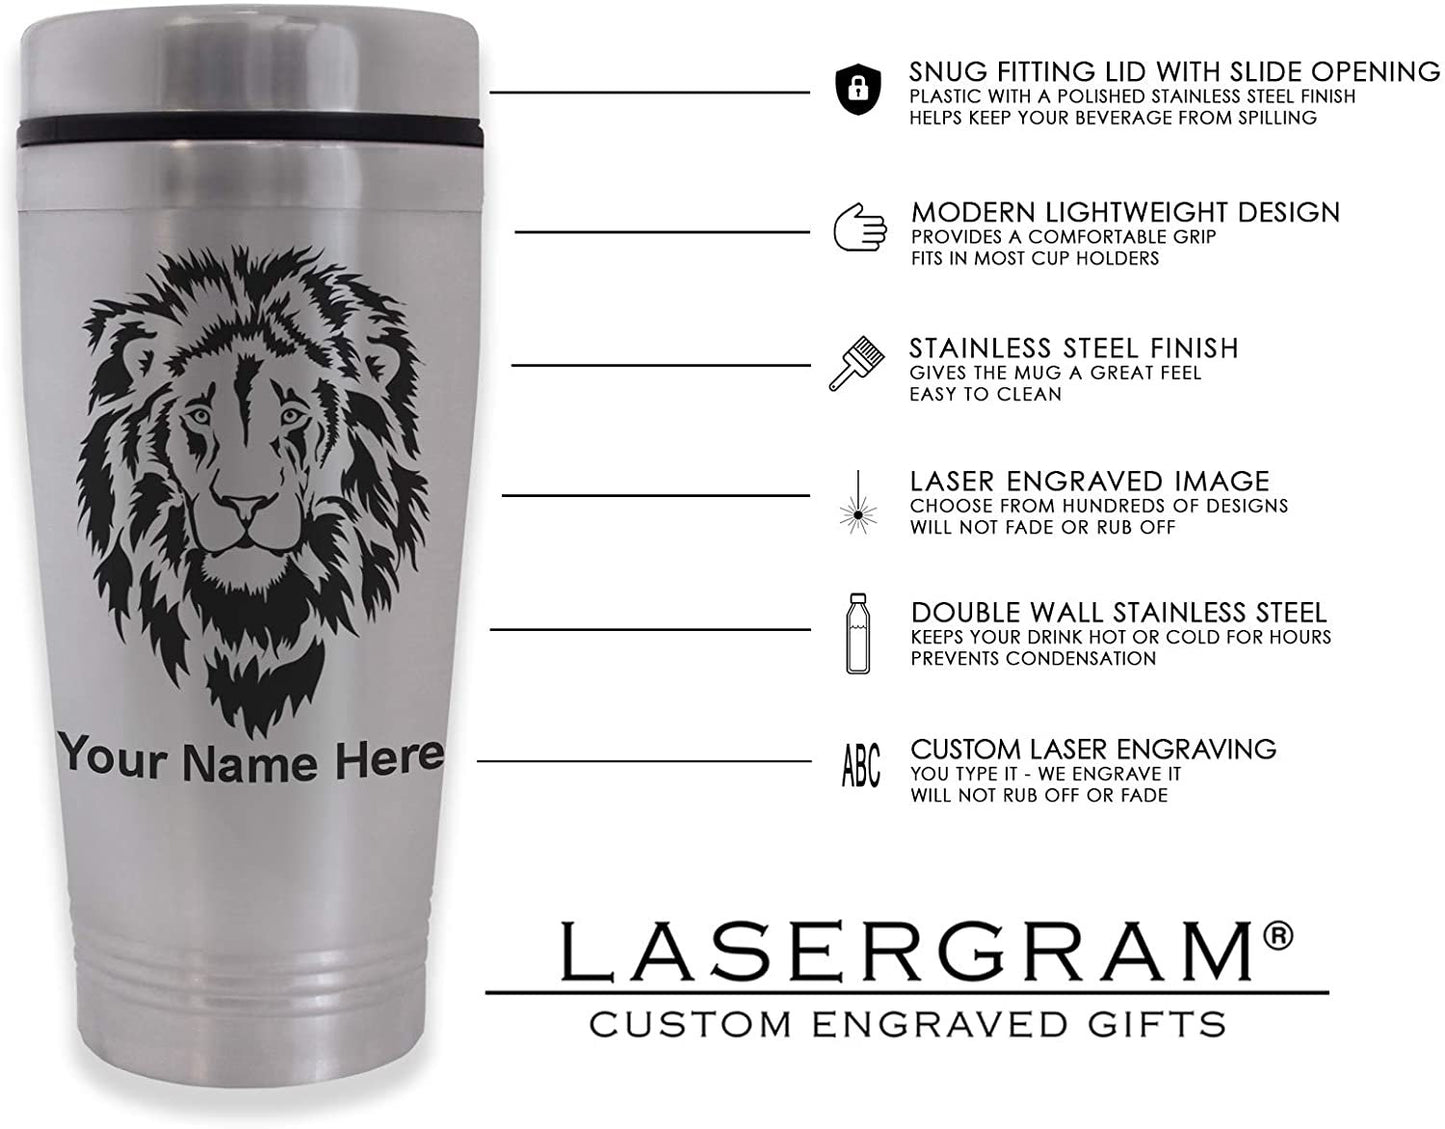 Commuter Travel Mug, World's Greatest Employee, Personalized Engraving Included